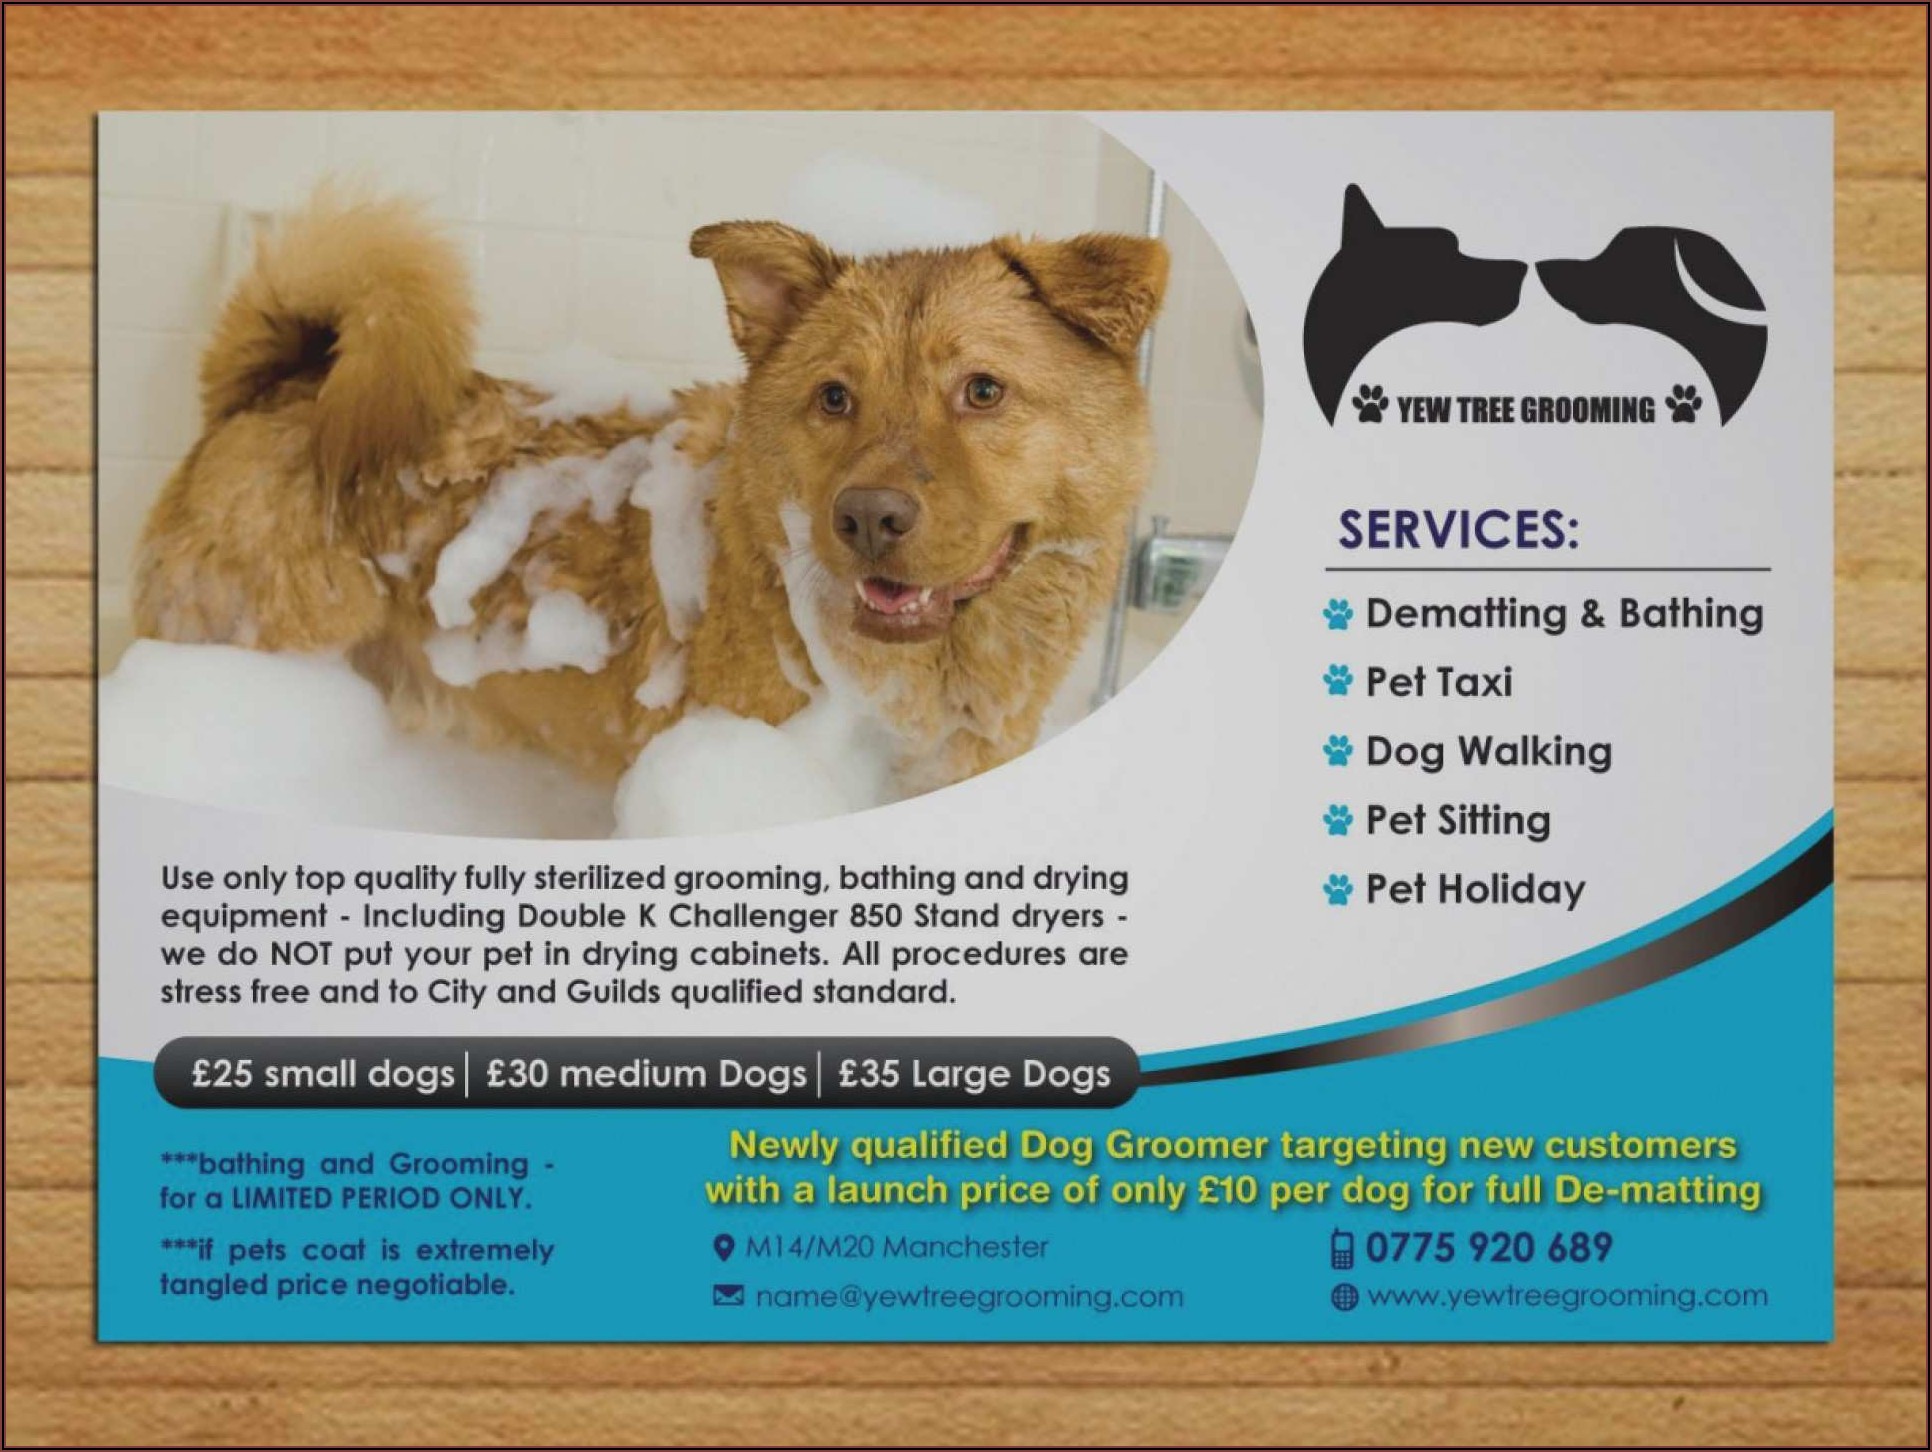 Dog Grooming Flyers Template